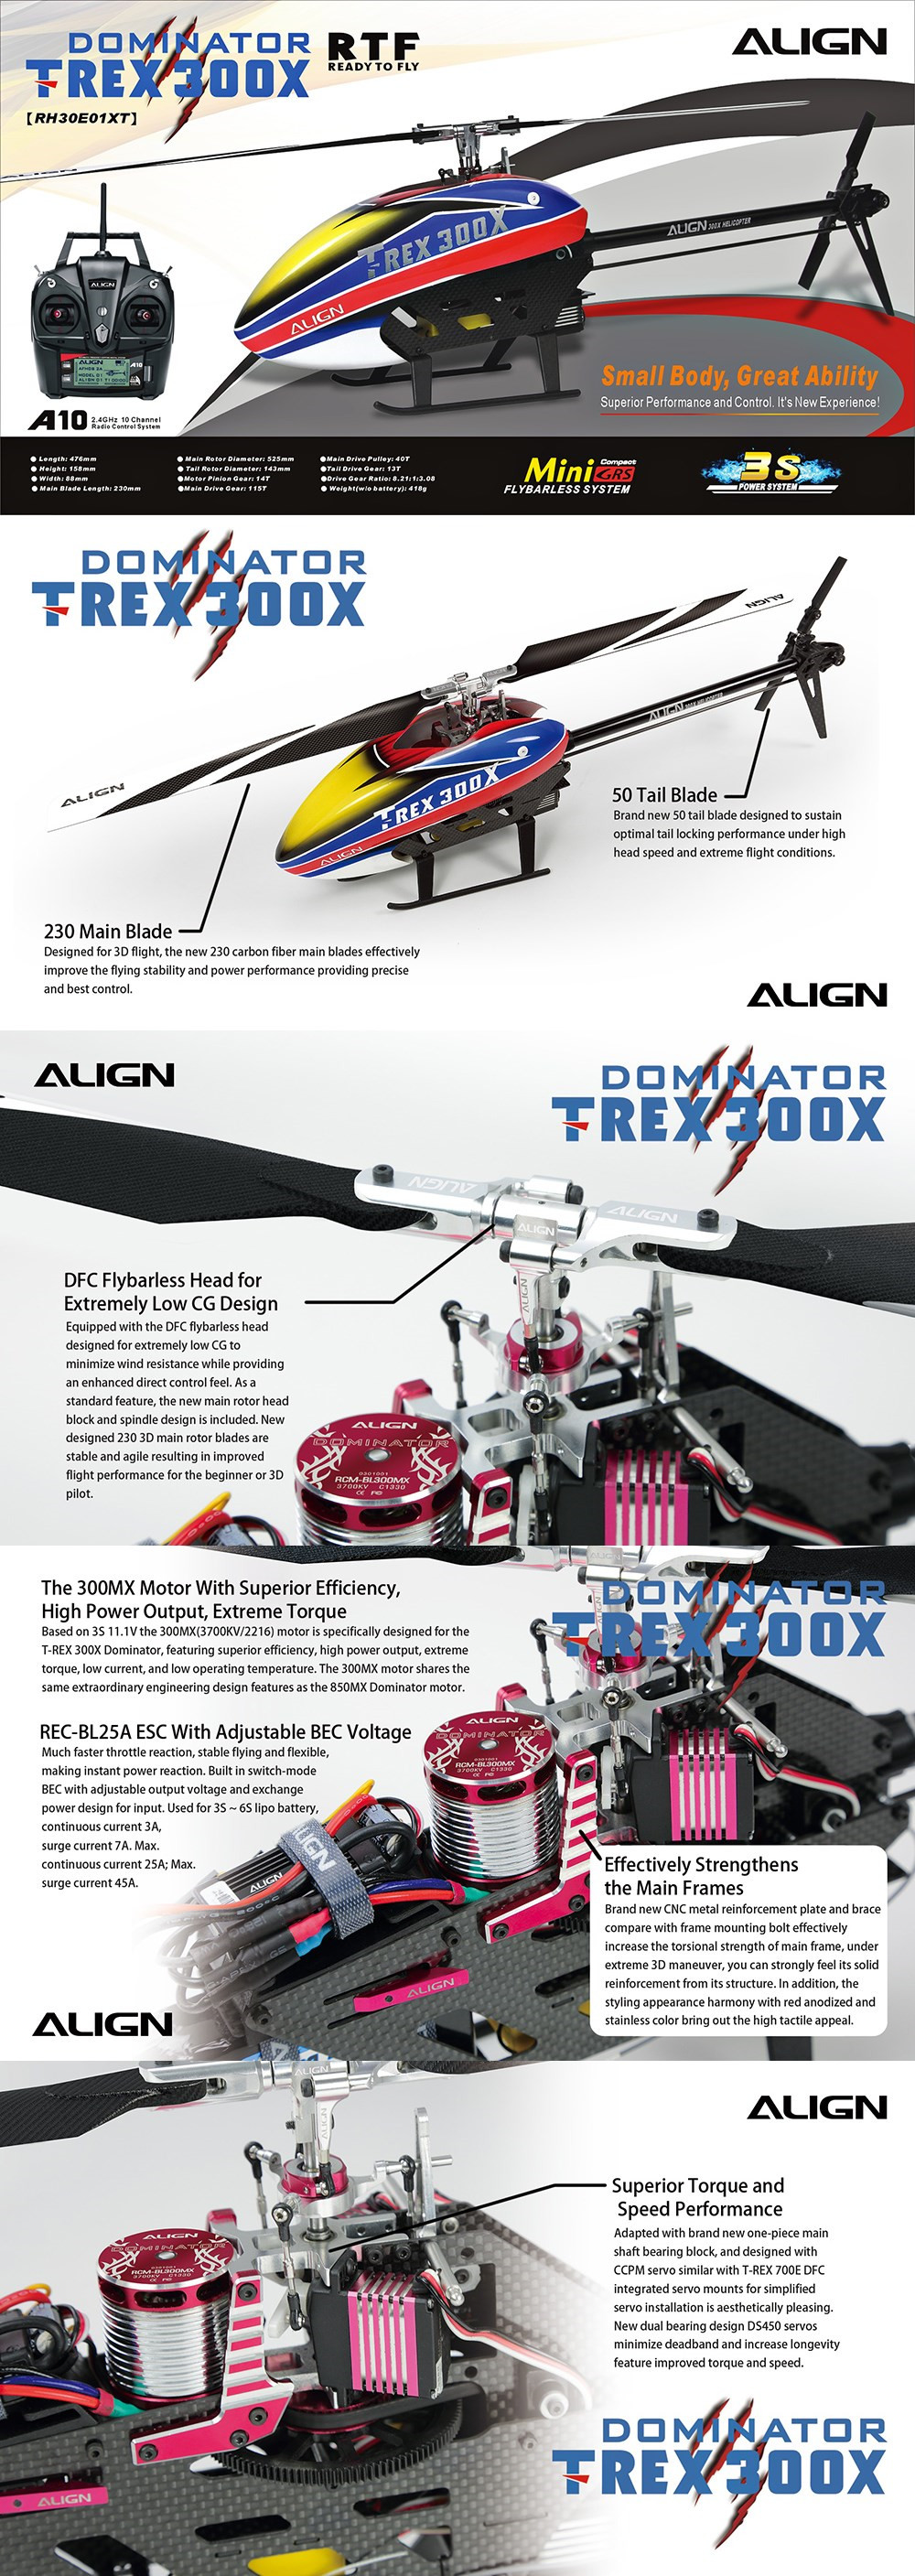 Align-T-Rex-300X-DOMINATOR-DFC-6CH-3D-Flying-RC-Helicopter-RTF-With-A10-Transmitter-1542056-1